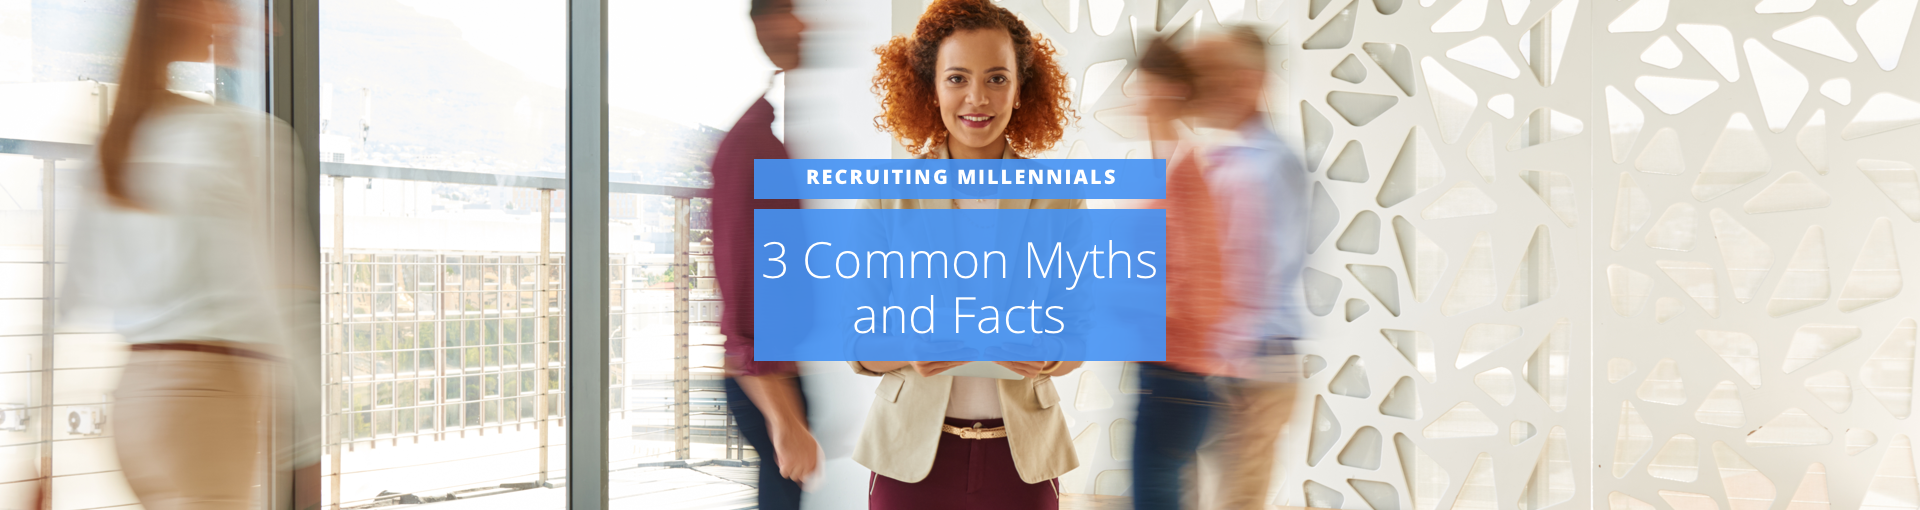 Recruiting Millennials: 3 Common Myths and Facts Featured Image